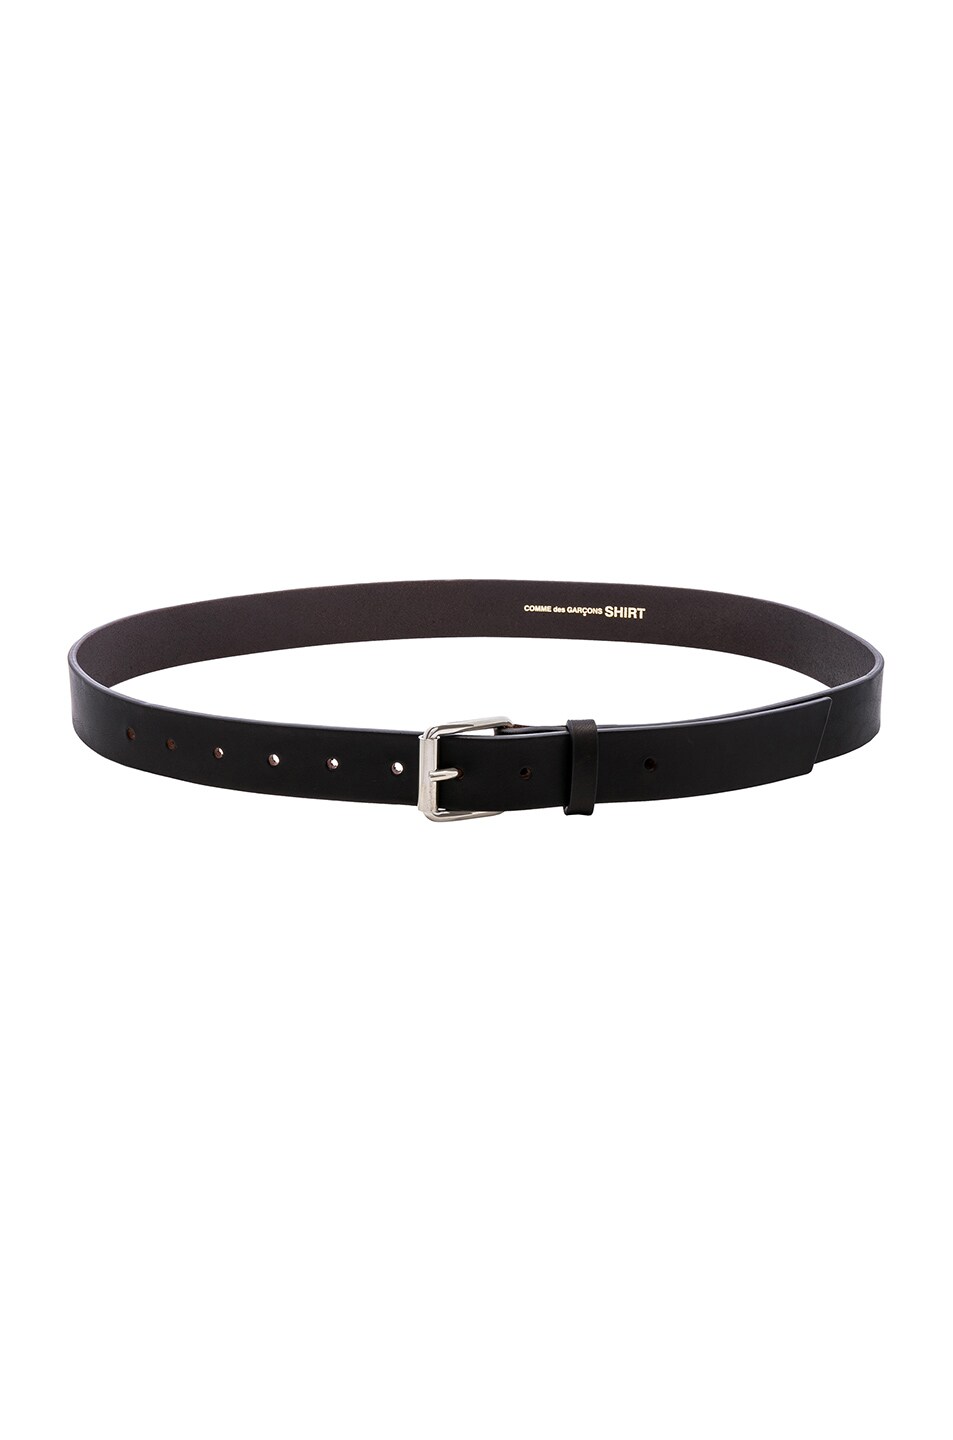 Image 1 of COMME des GARCONS SHIRT Leather Belt in Brown